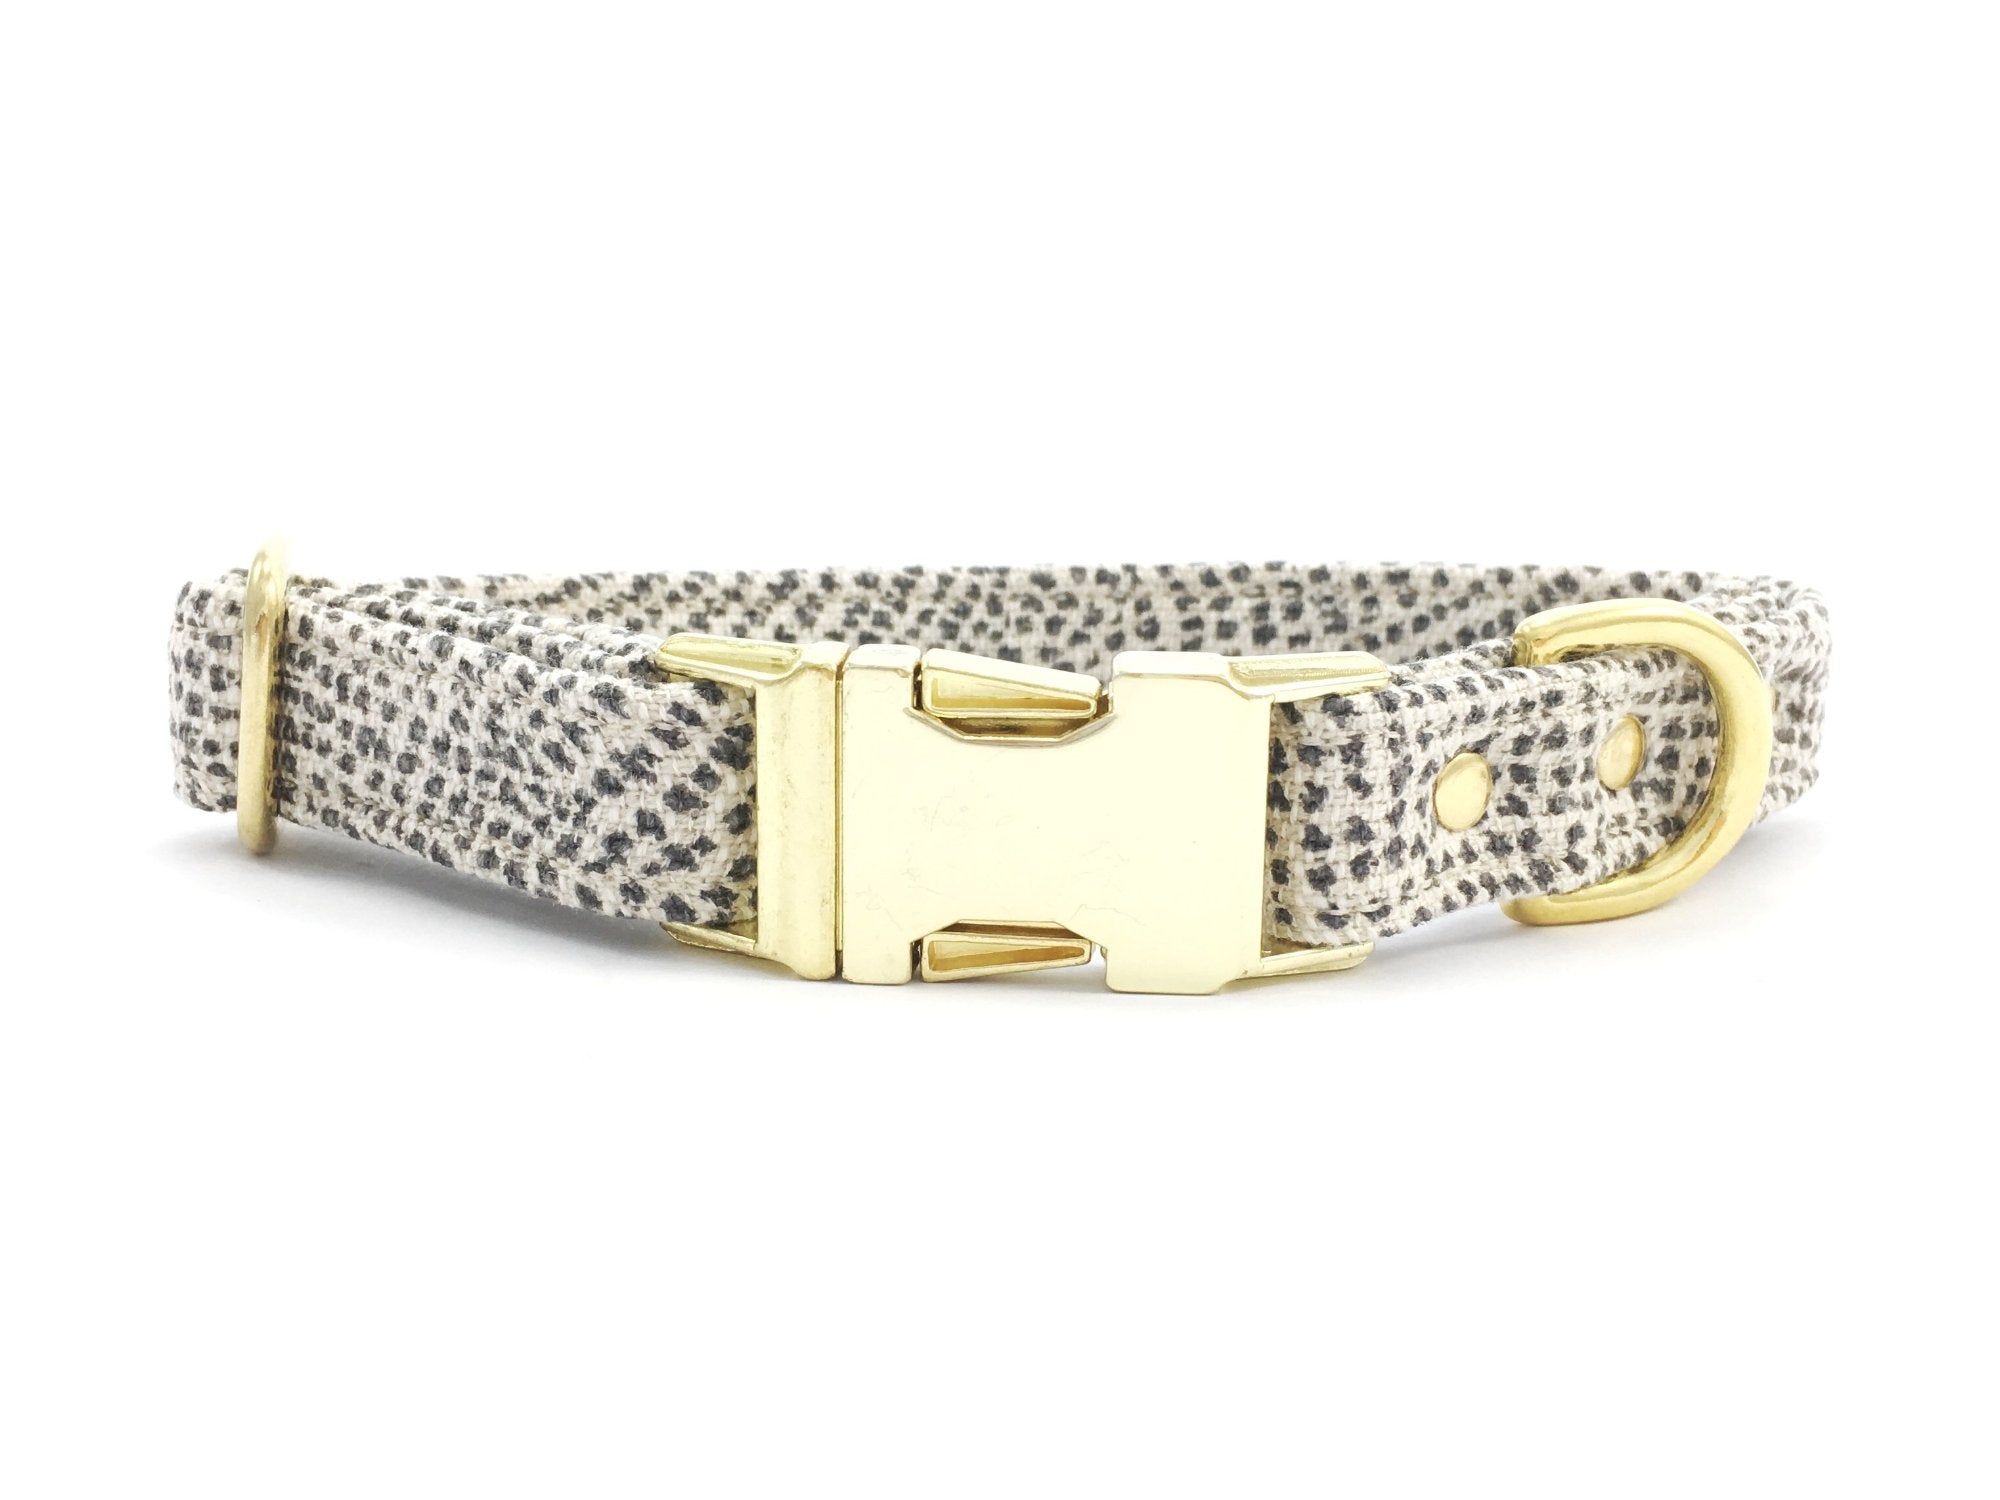 Luxury grey polka dot cotton fabric dog collar with brass buckle & solid brass hardware, made in London in the UK